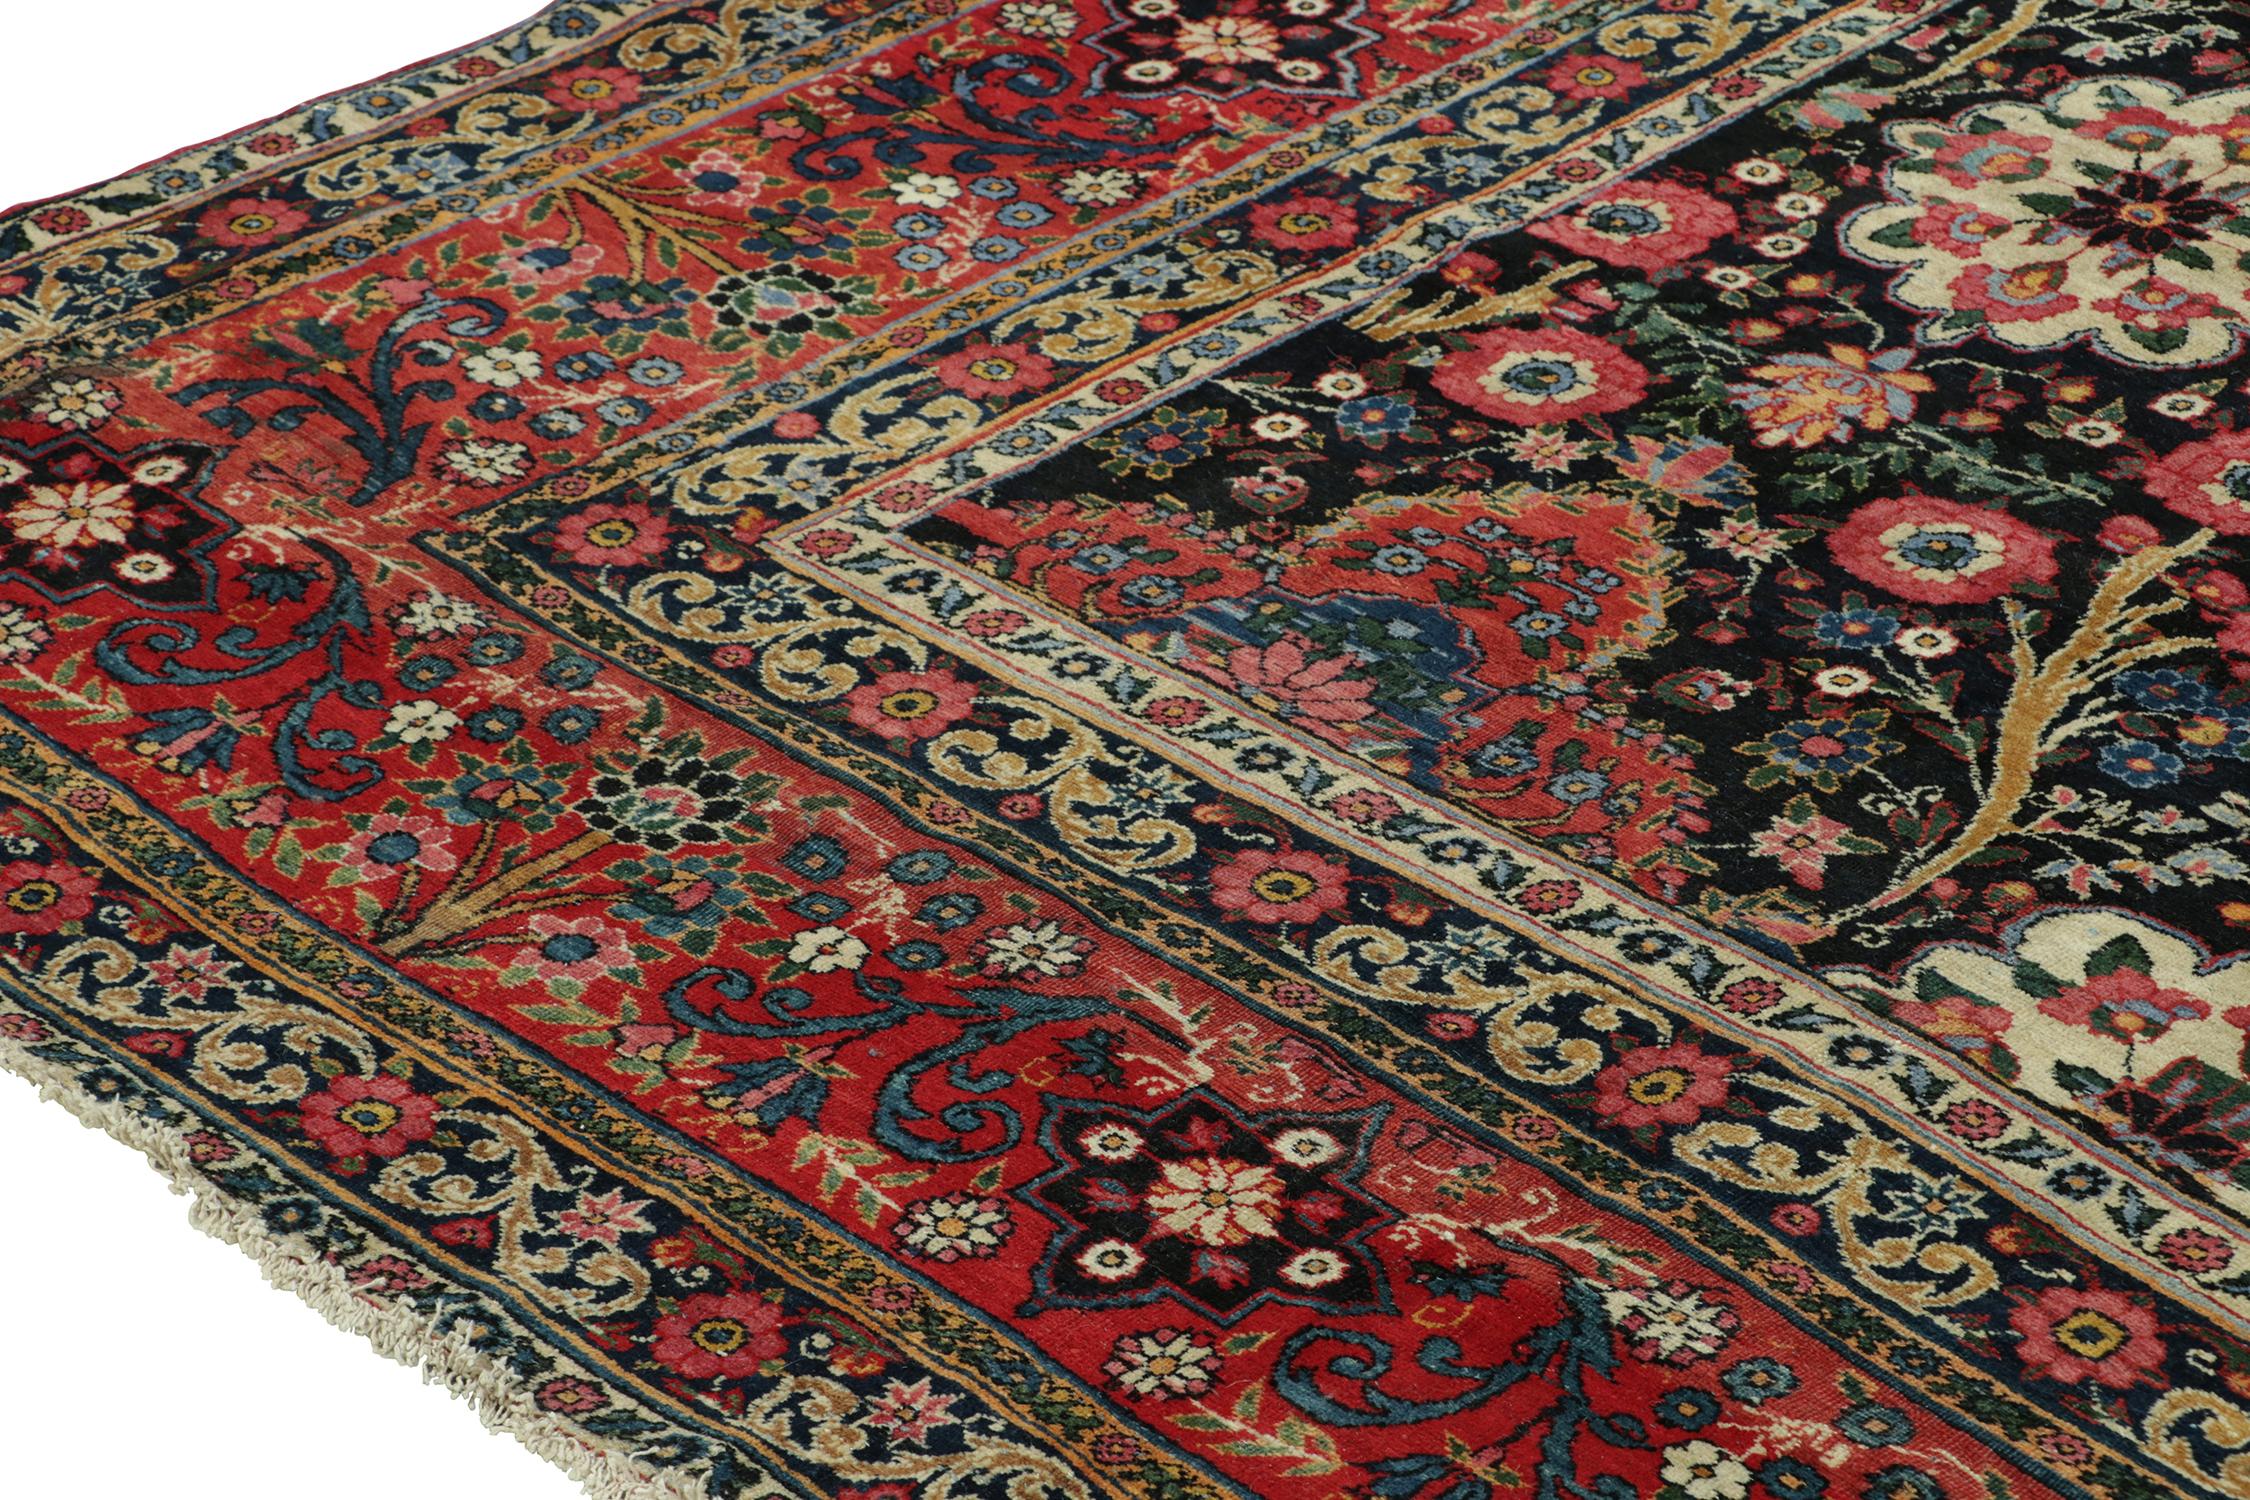 Antique Persian Rug in Black with Red Floral Patterns - by Rug & Kilim In Good Condition For Sale In Long Island City, NY